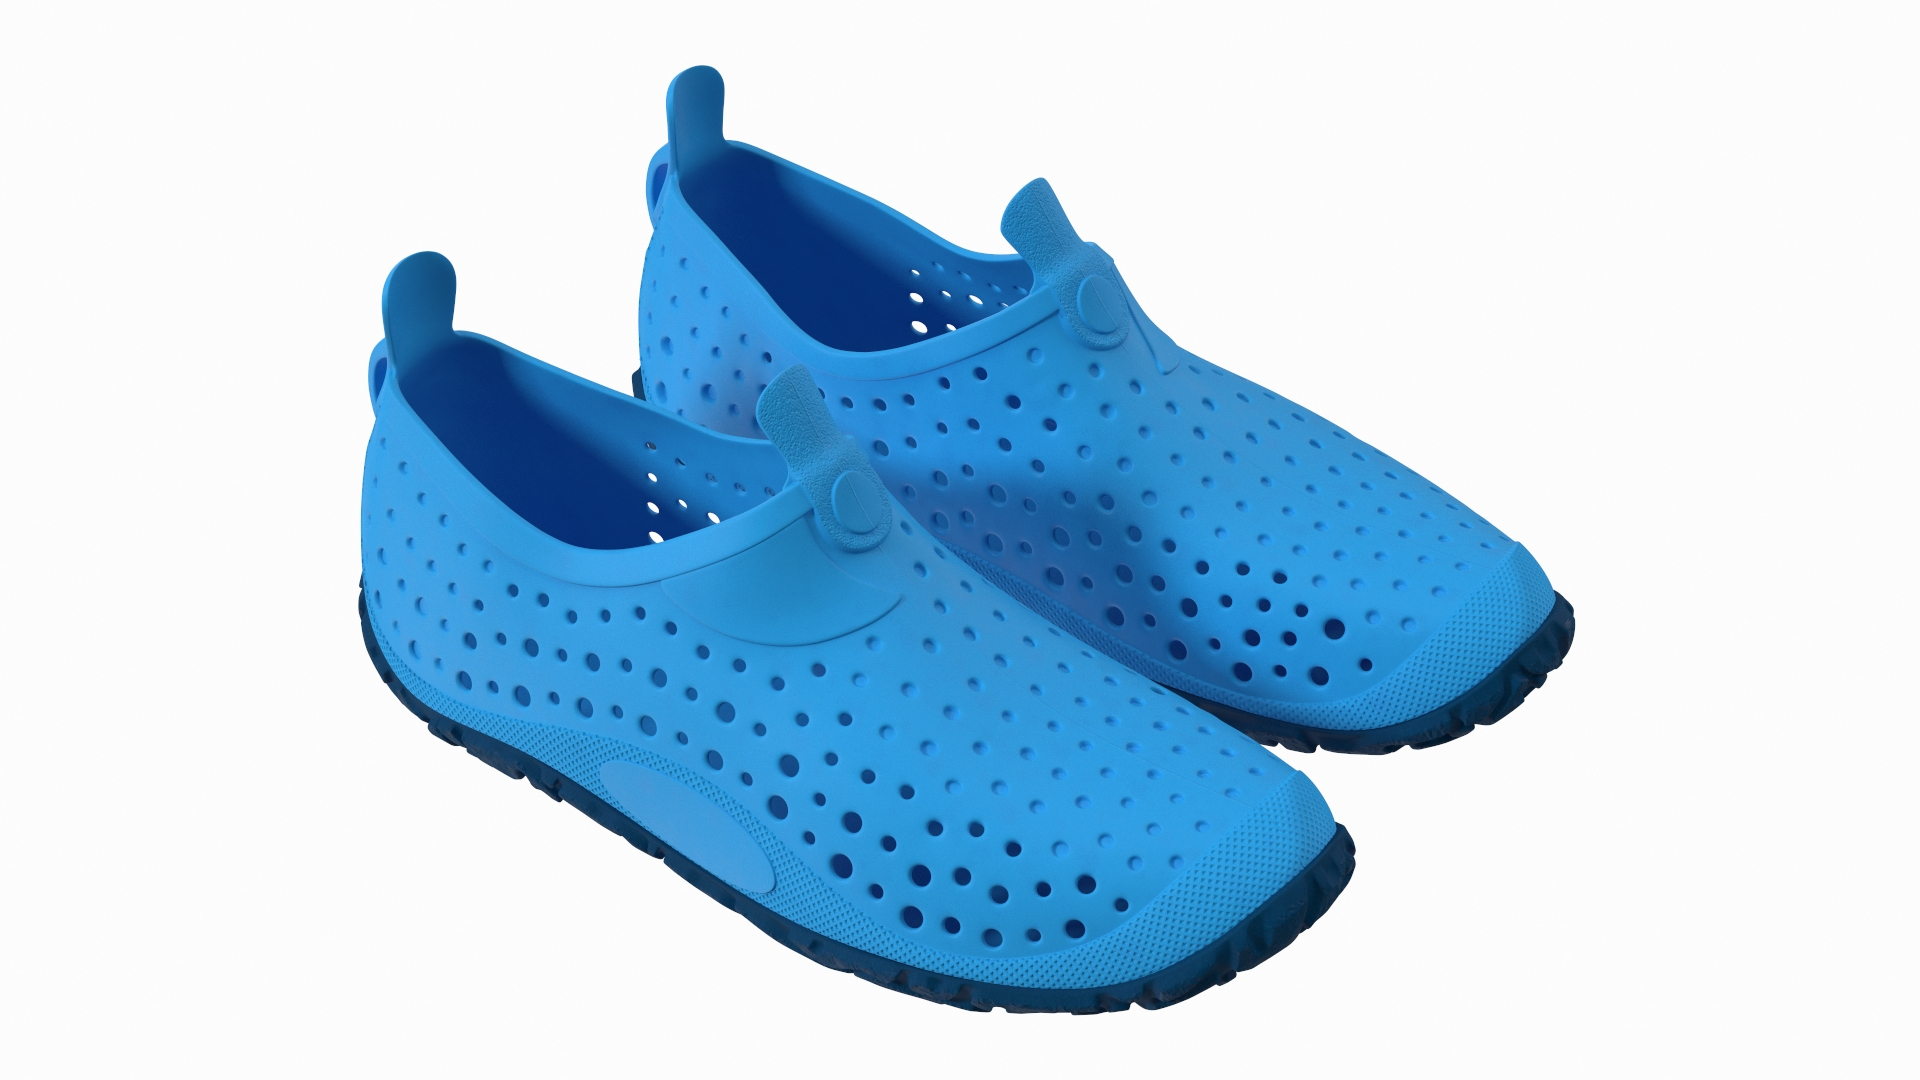 3D Swimming Pool Shoes for Kids Blue model - TurboSquid 1851580